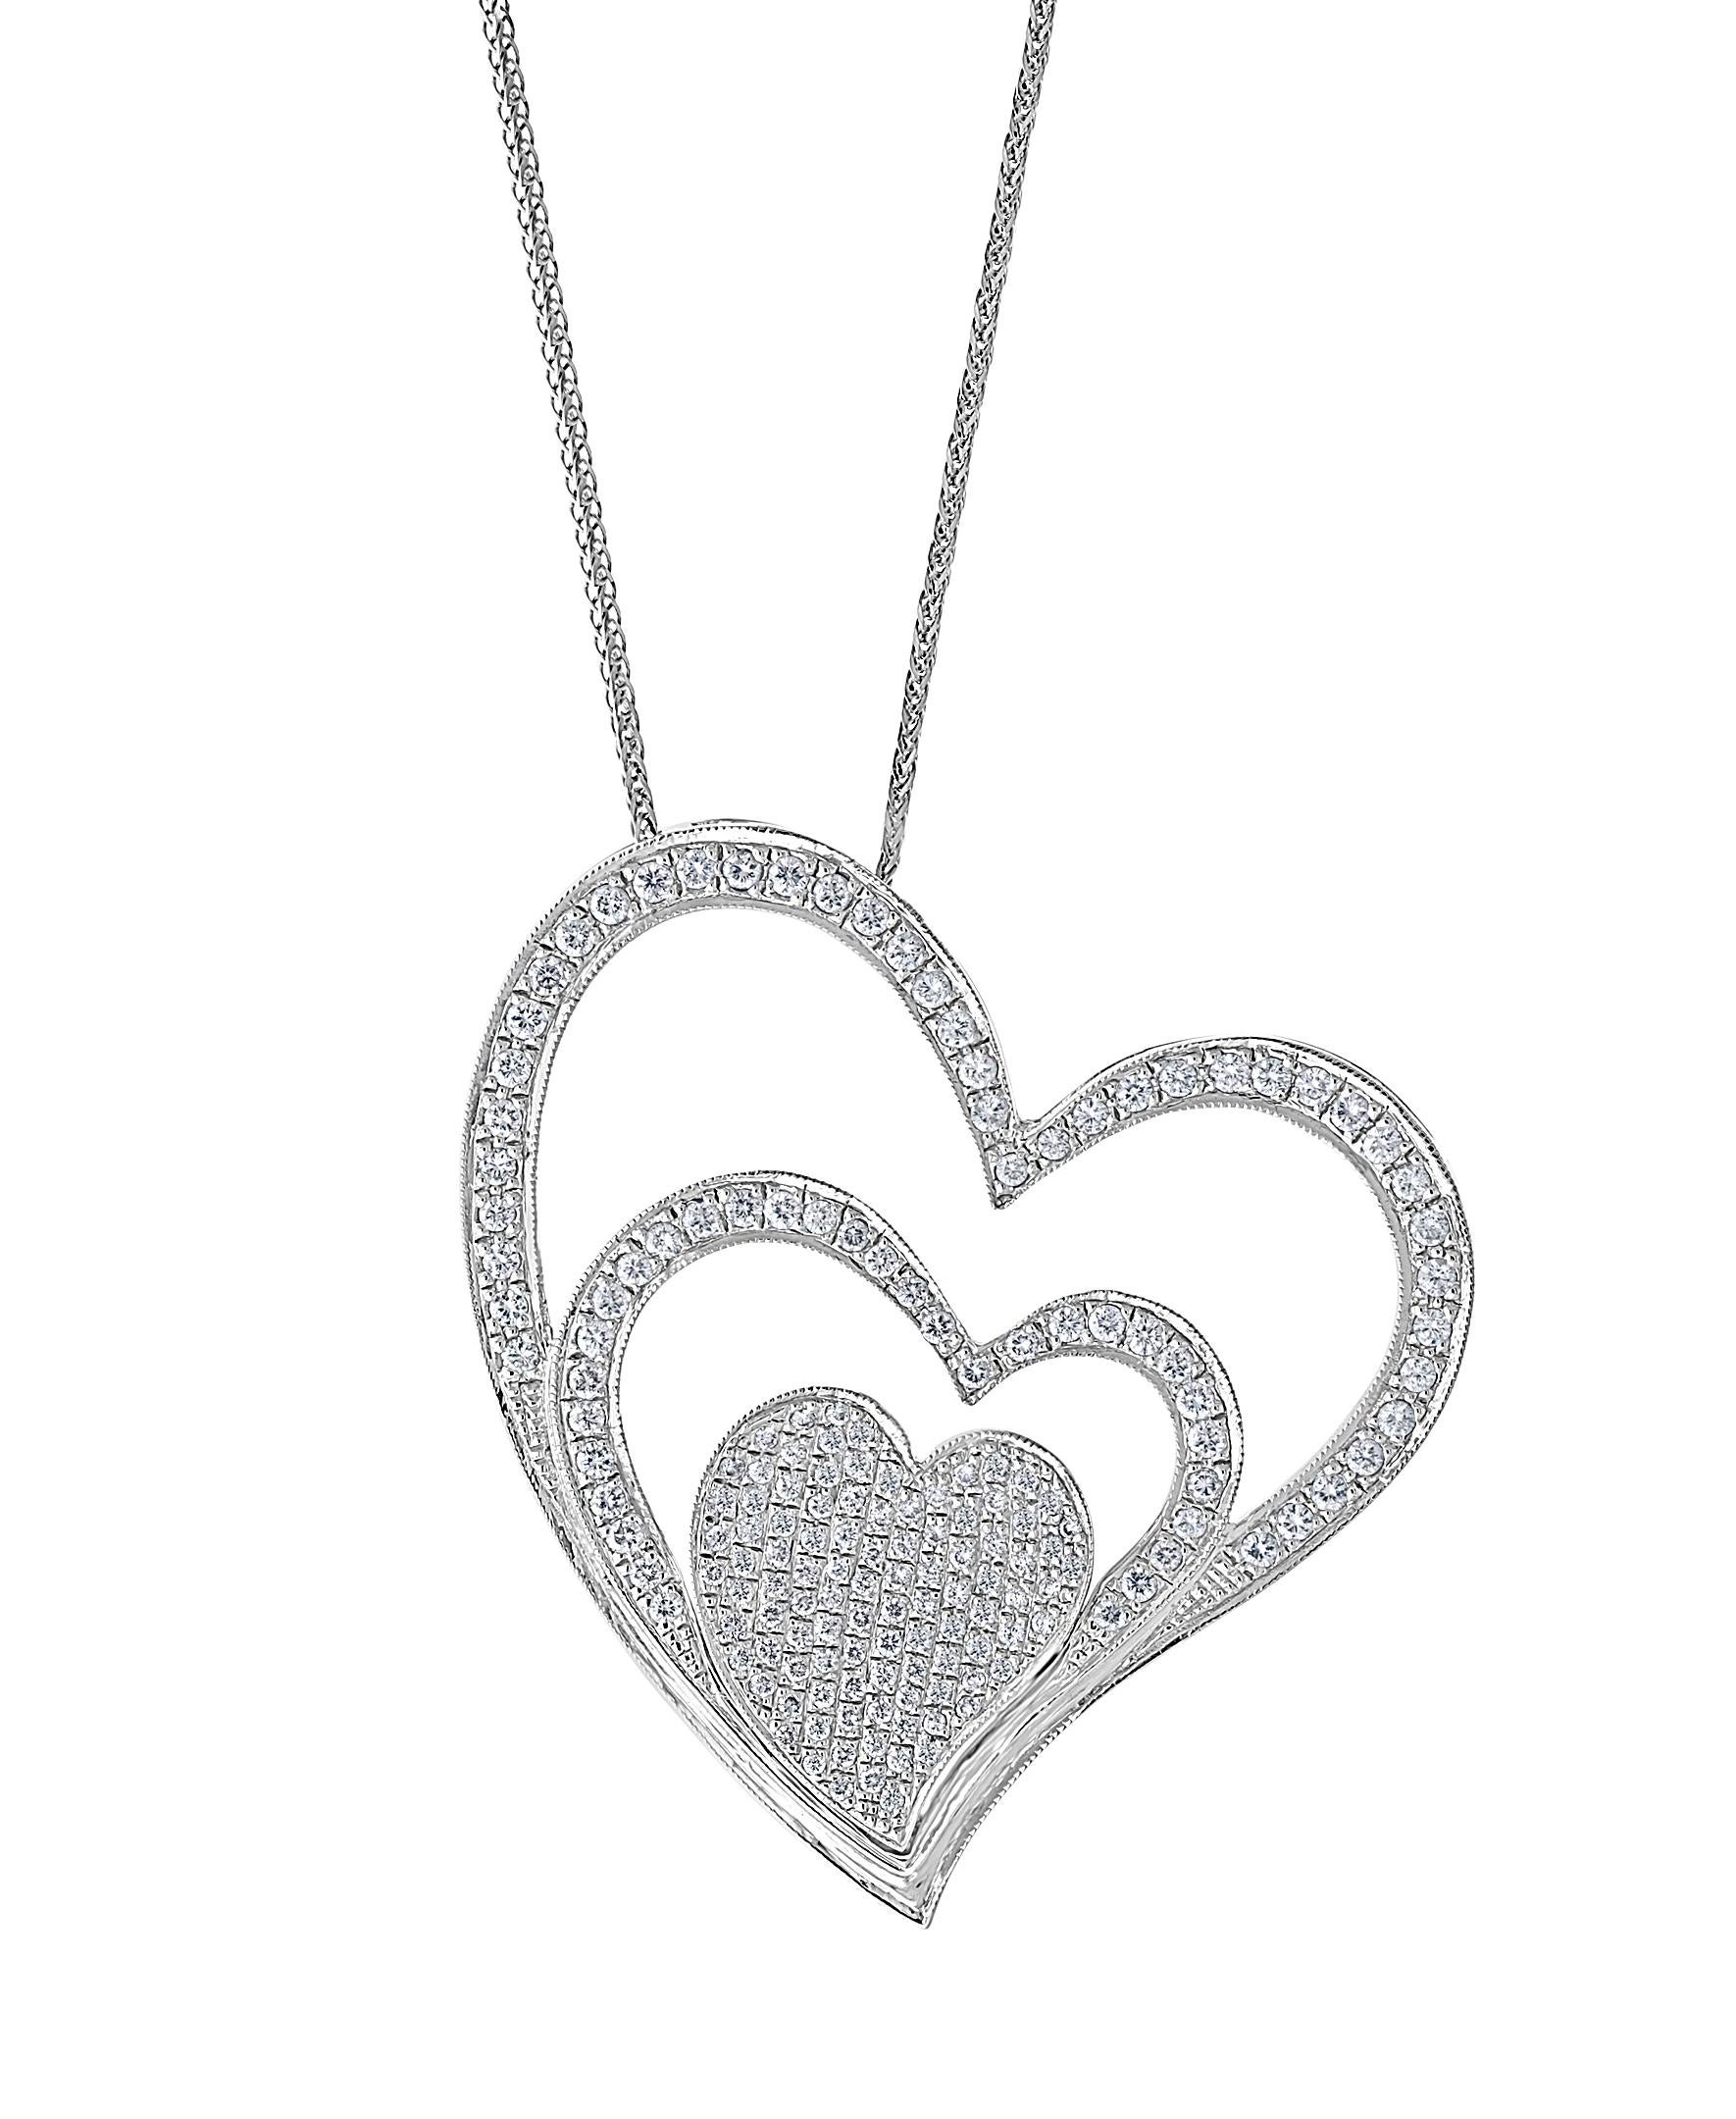 3.6 Ct Diamond 3 Heart Pendant or Necklace 18 K White Gold with 14 K Gold Chain 4